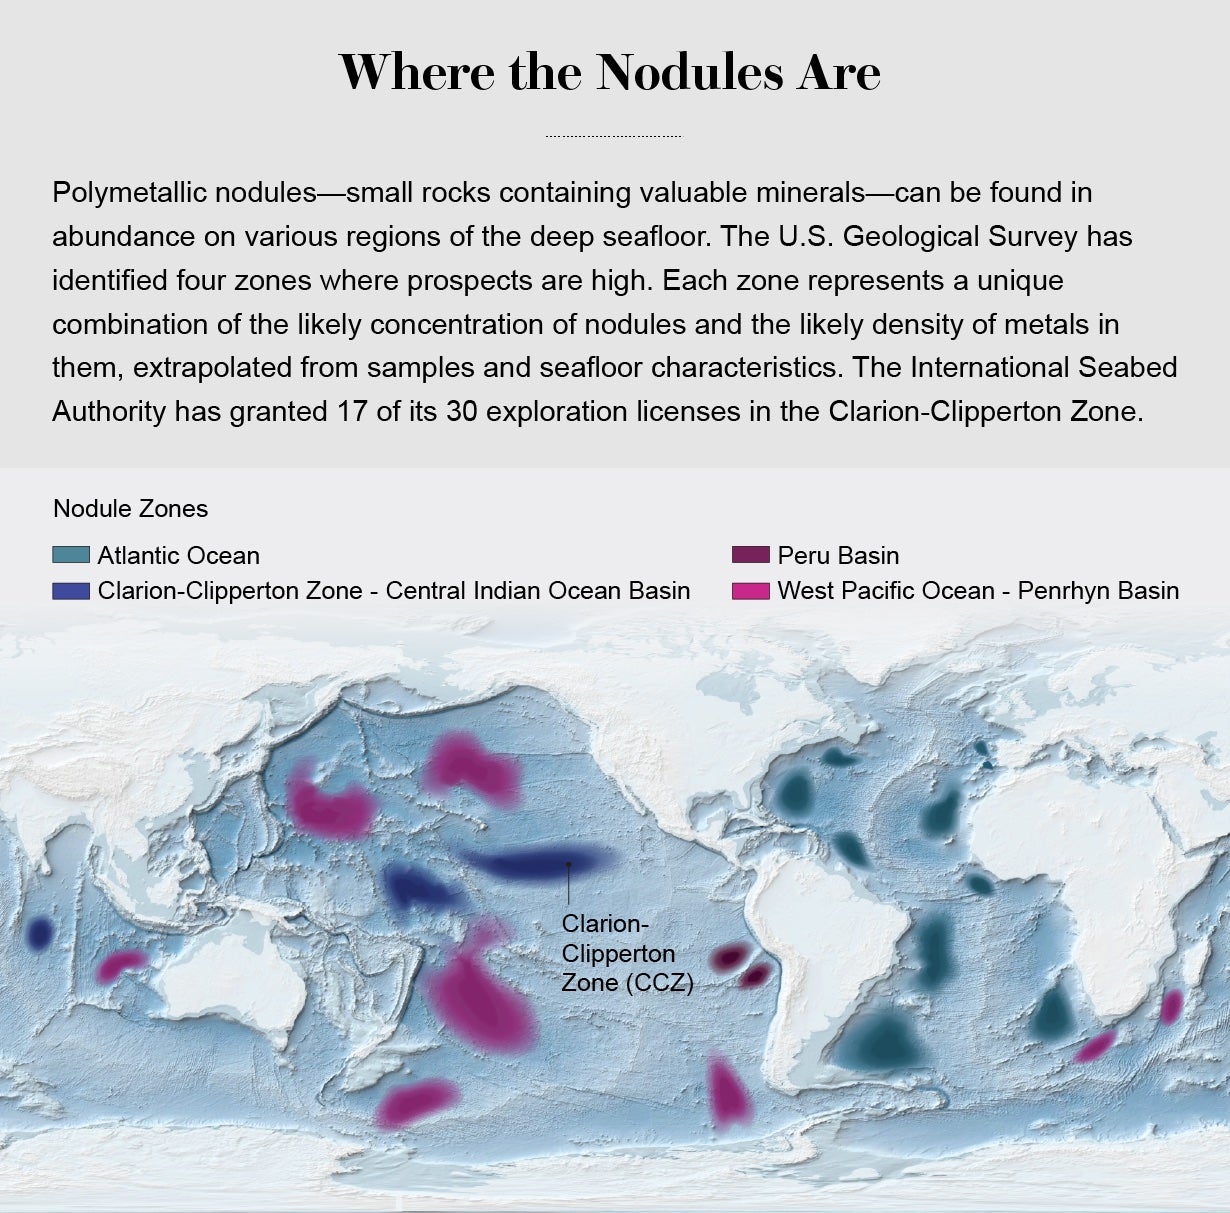 World map highlights areas where polymetallic nodules can likely be found on the seafloor with color coding indicating the Atlantic Ocean, Peru Basin, Clarion-Clipperton, and West Pacific Ocean zones.